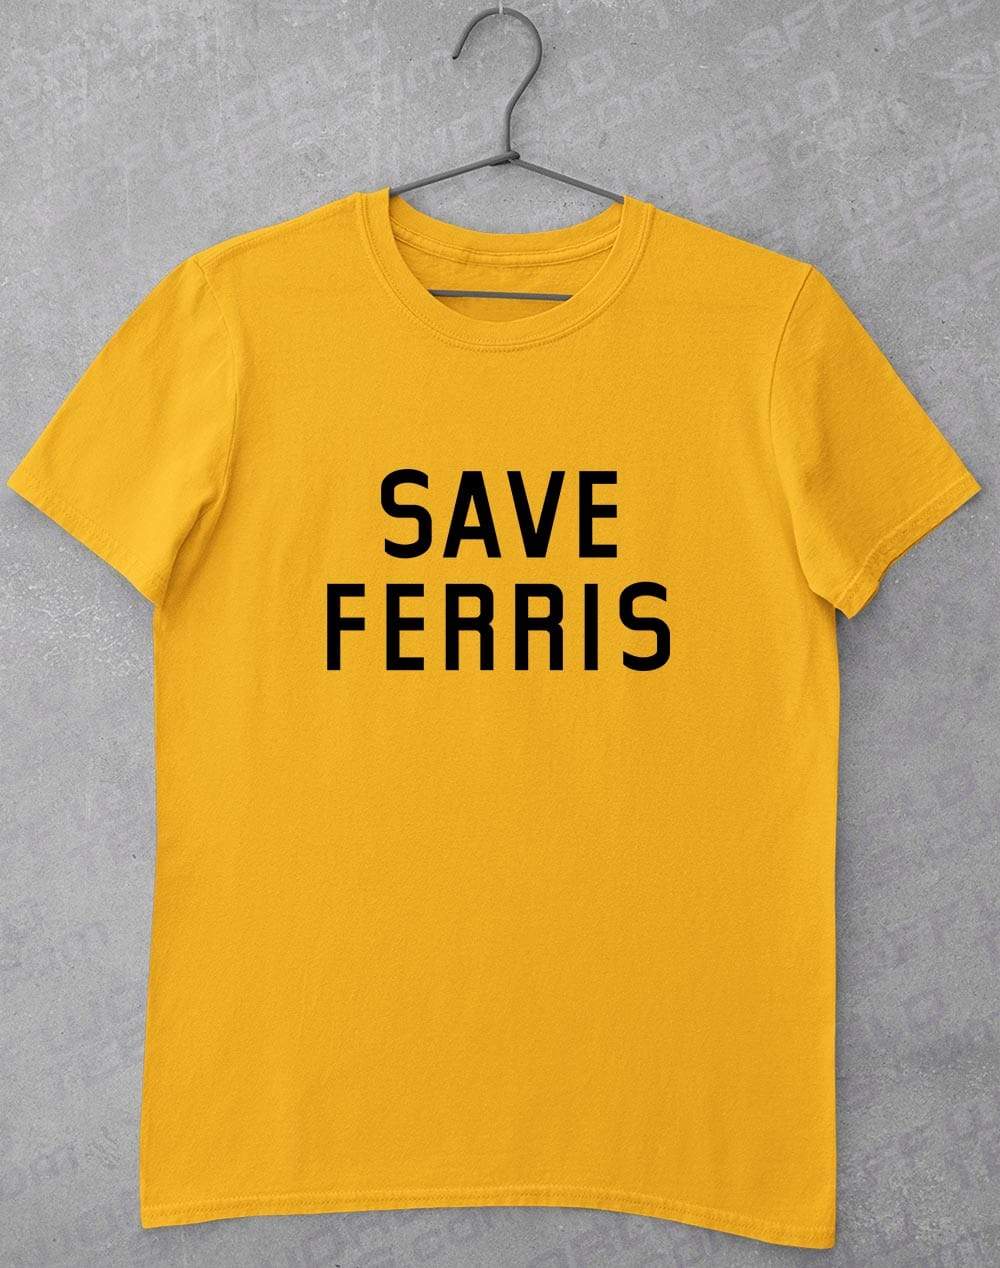 Save Ferris T-Shirt S / Gold  - Off World Tees